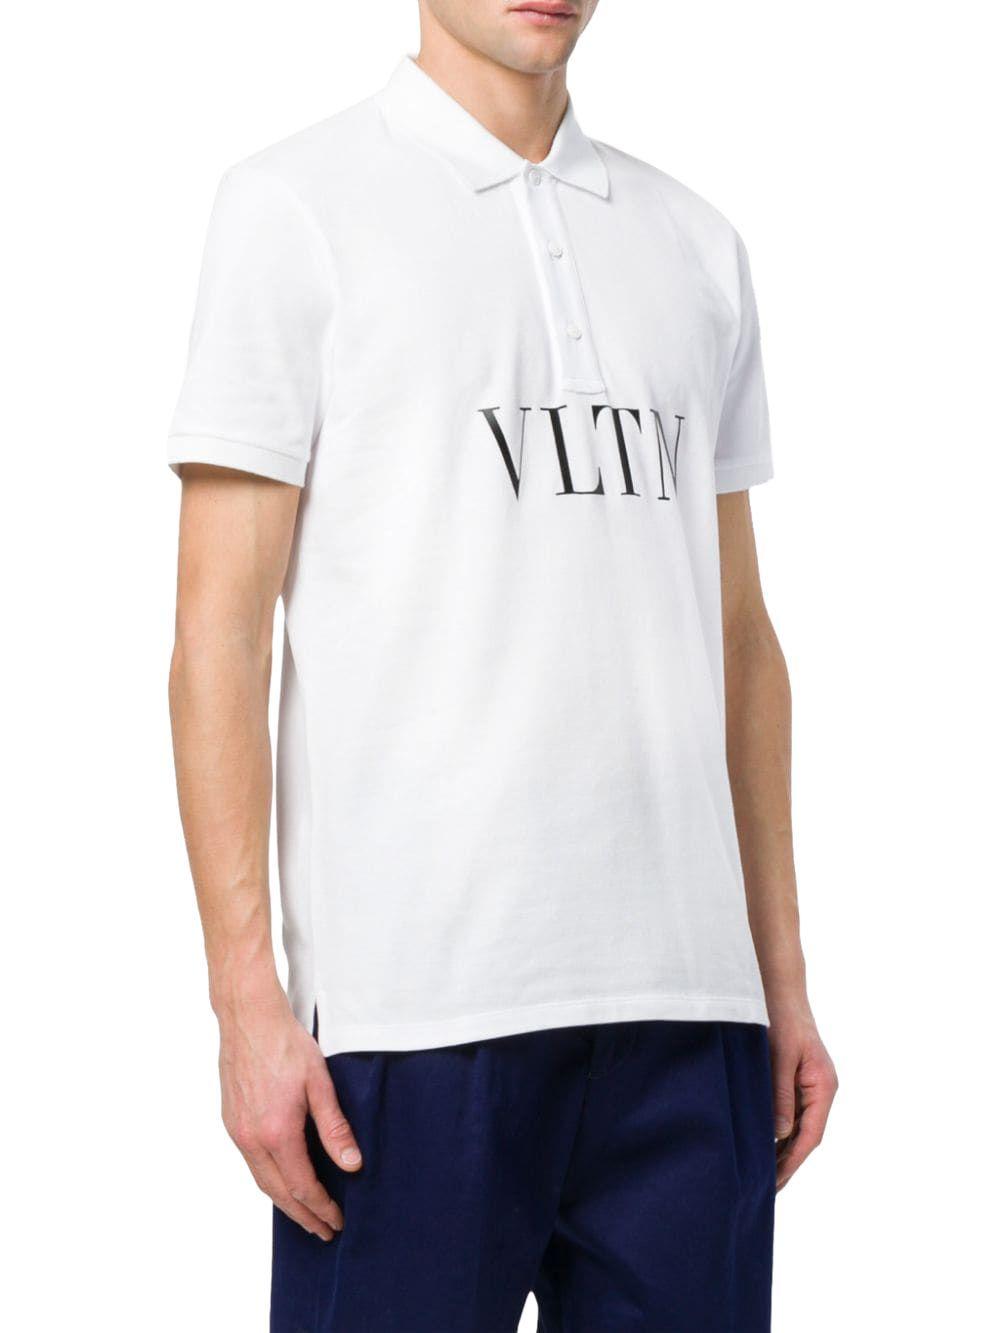 Valentino Cotton Polo Shirt in White for Men - Lyst